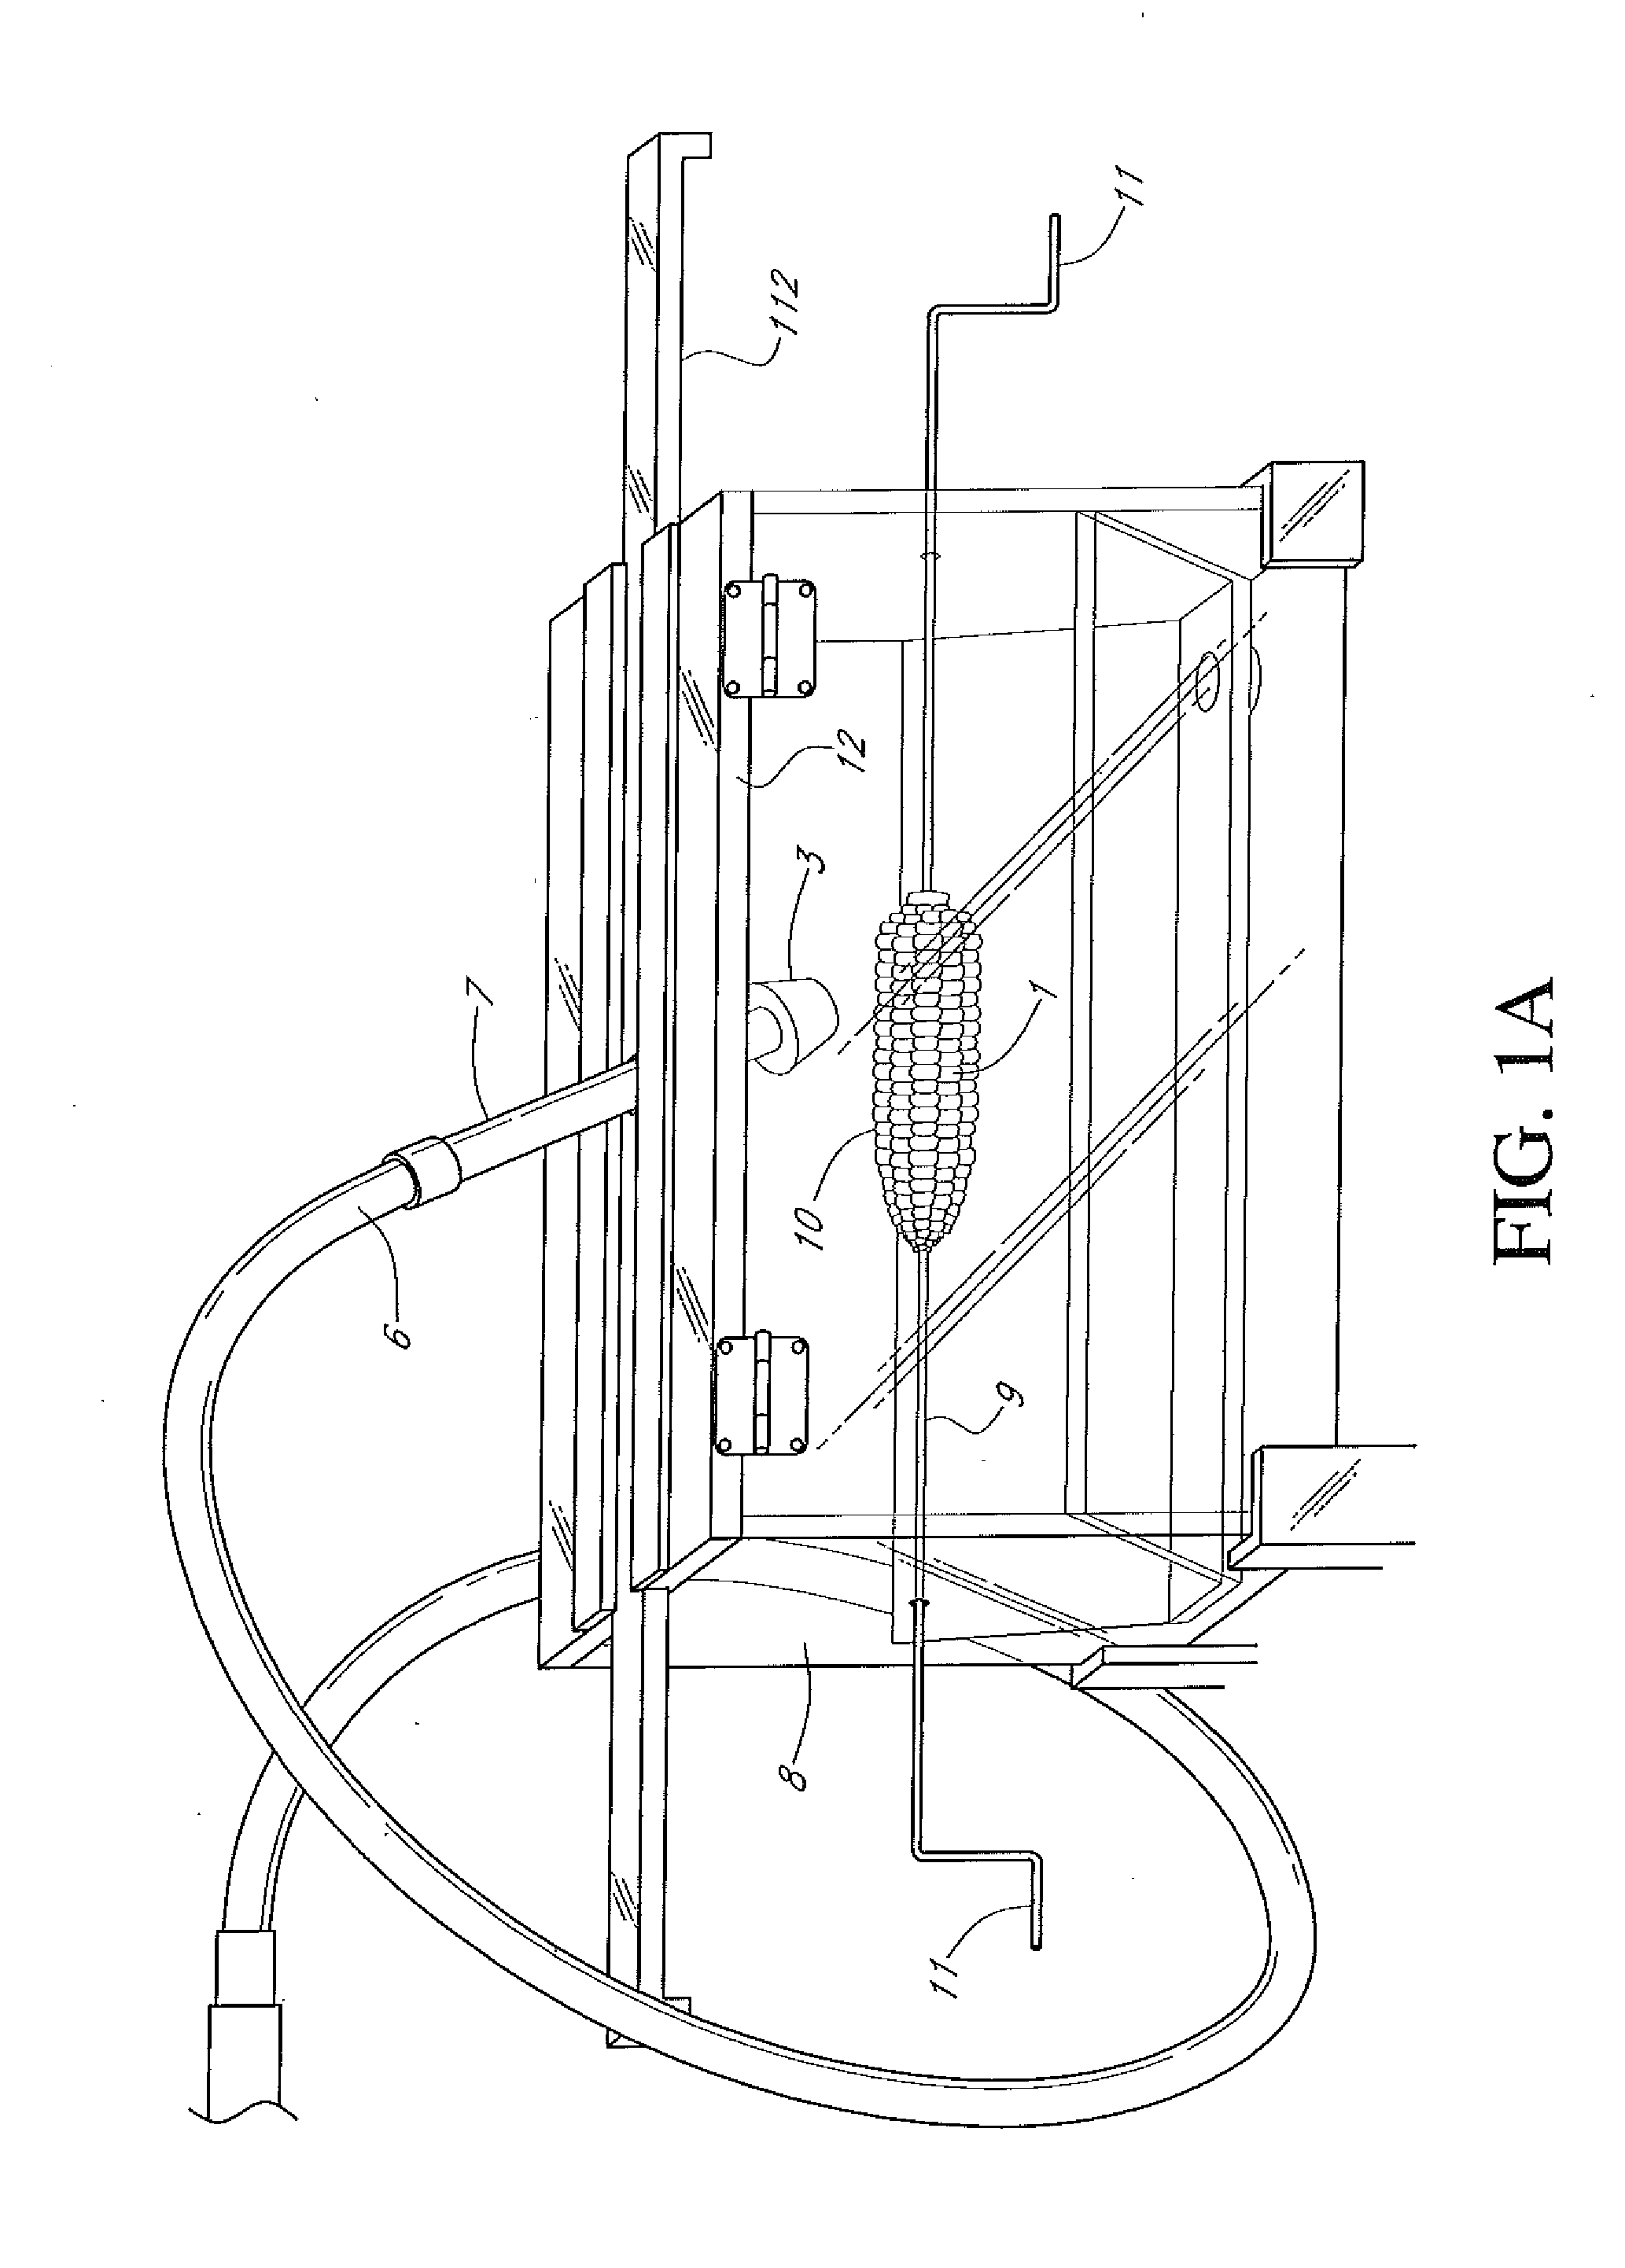 Method and Appartus for Extraction of Plant Embryos